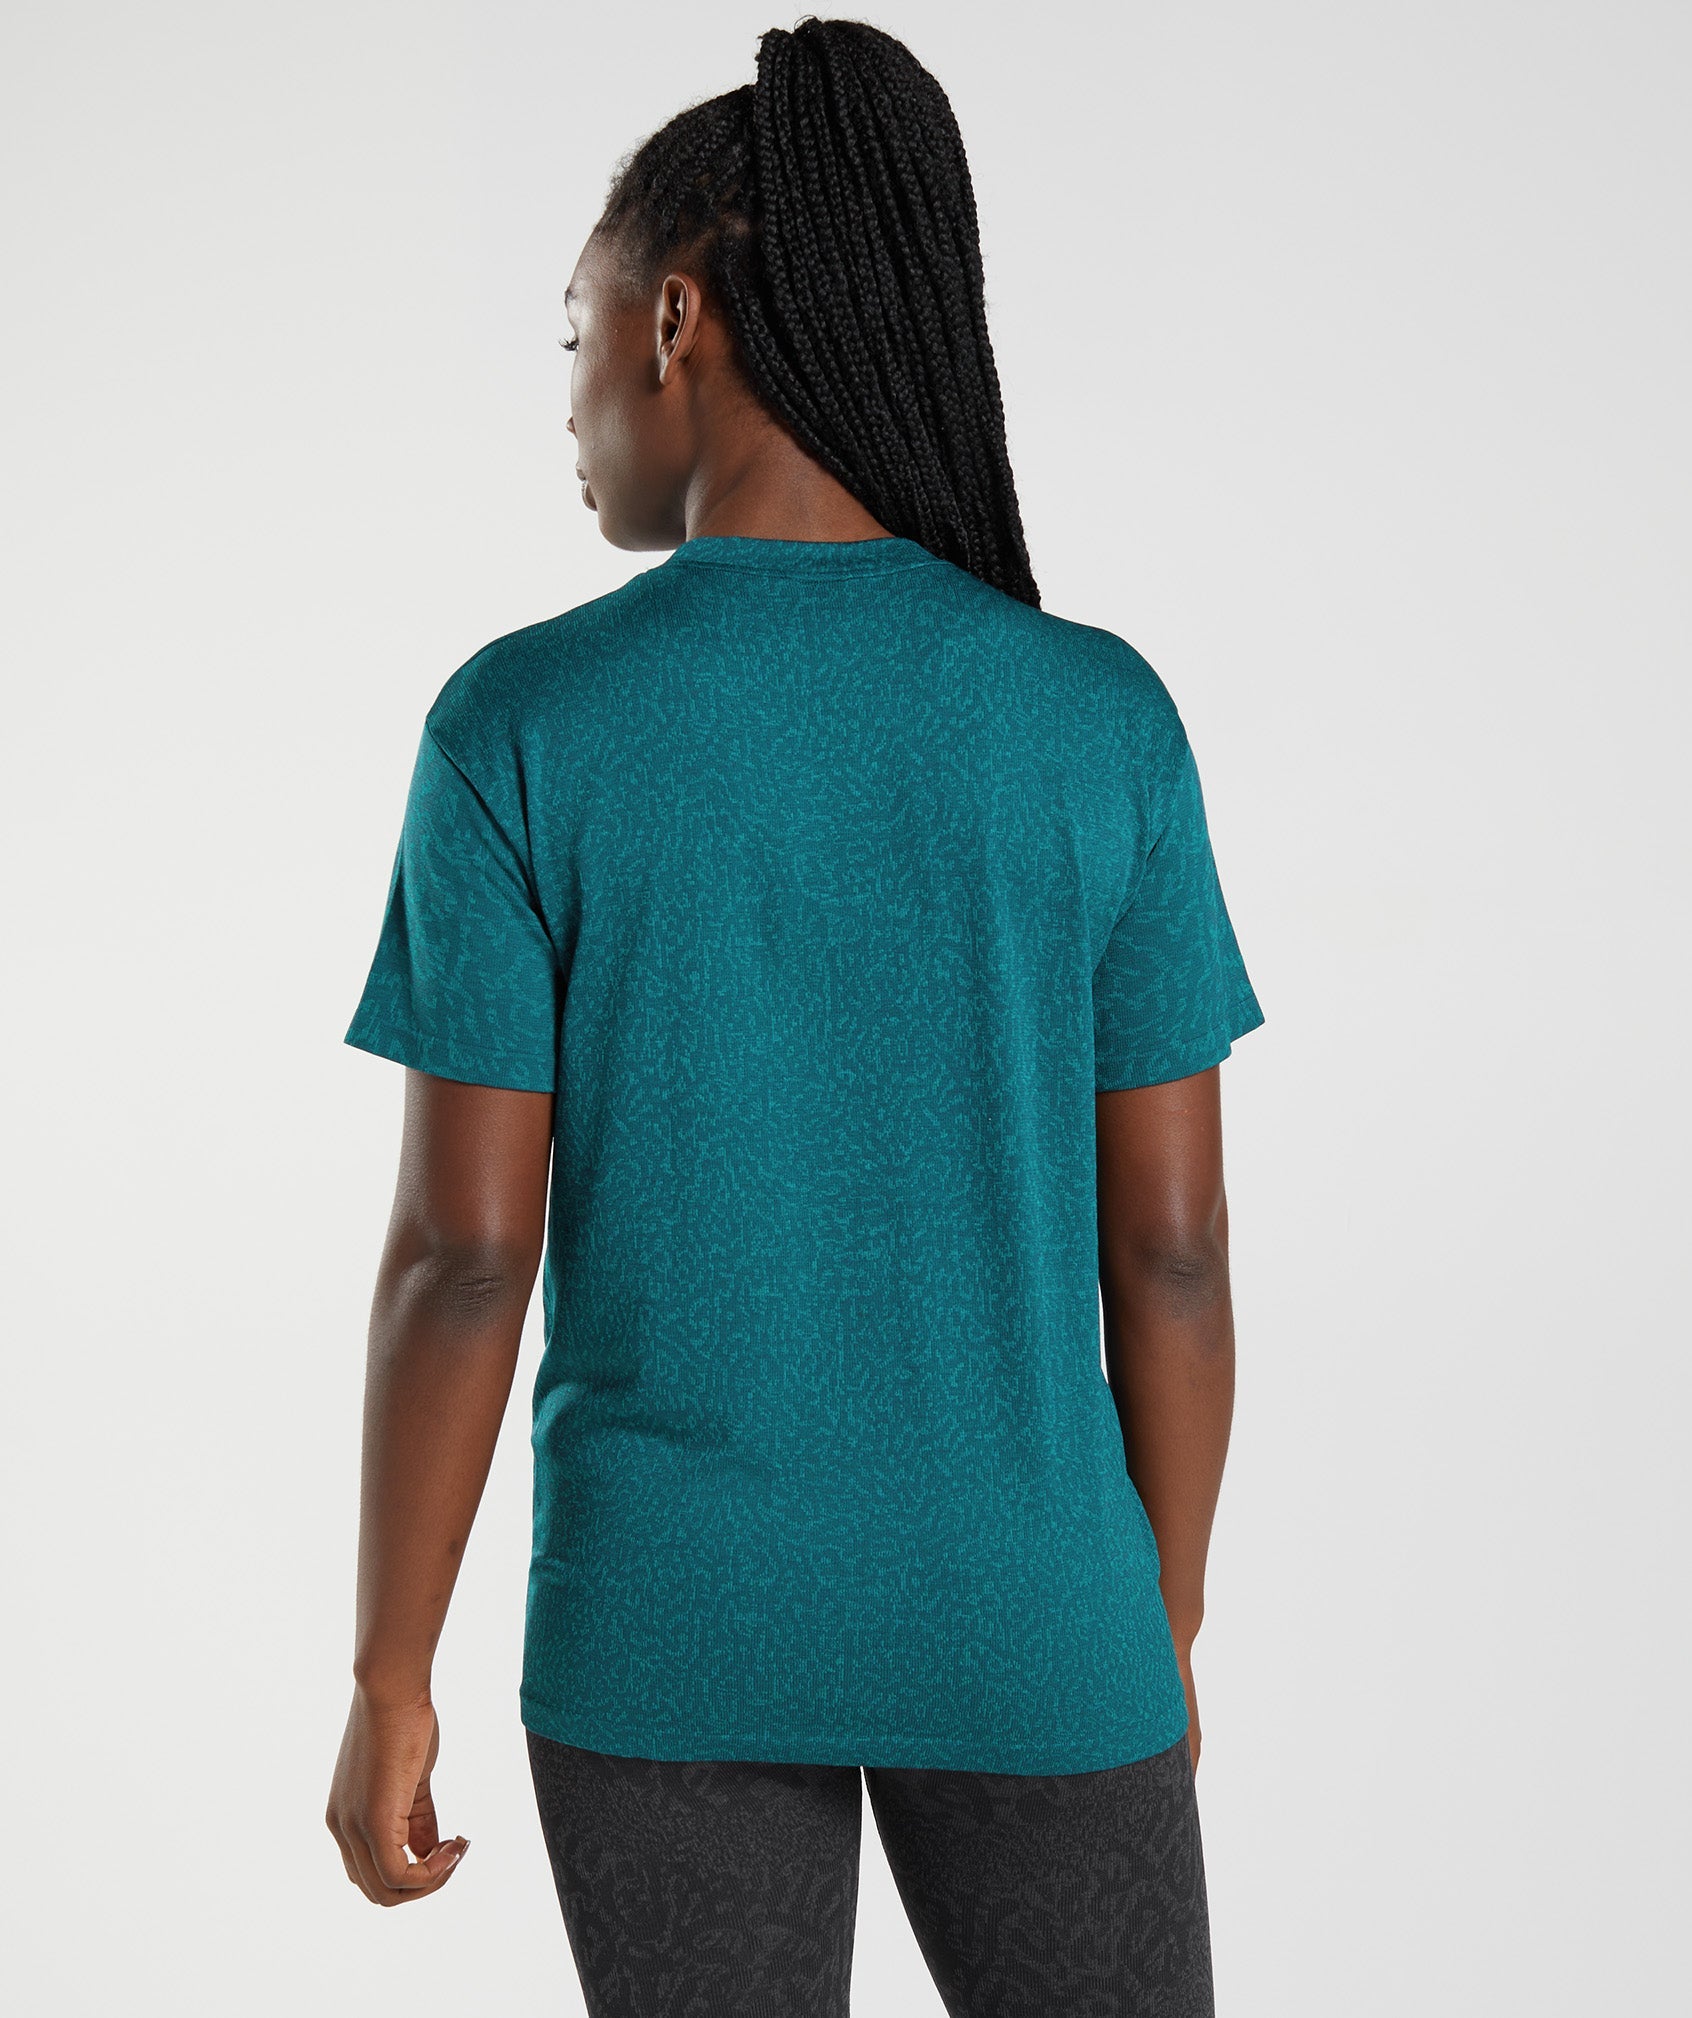 Adapt Animal Seamless T-Shirt in Reef | Winter Teal - view 2